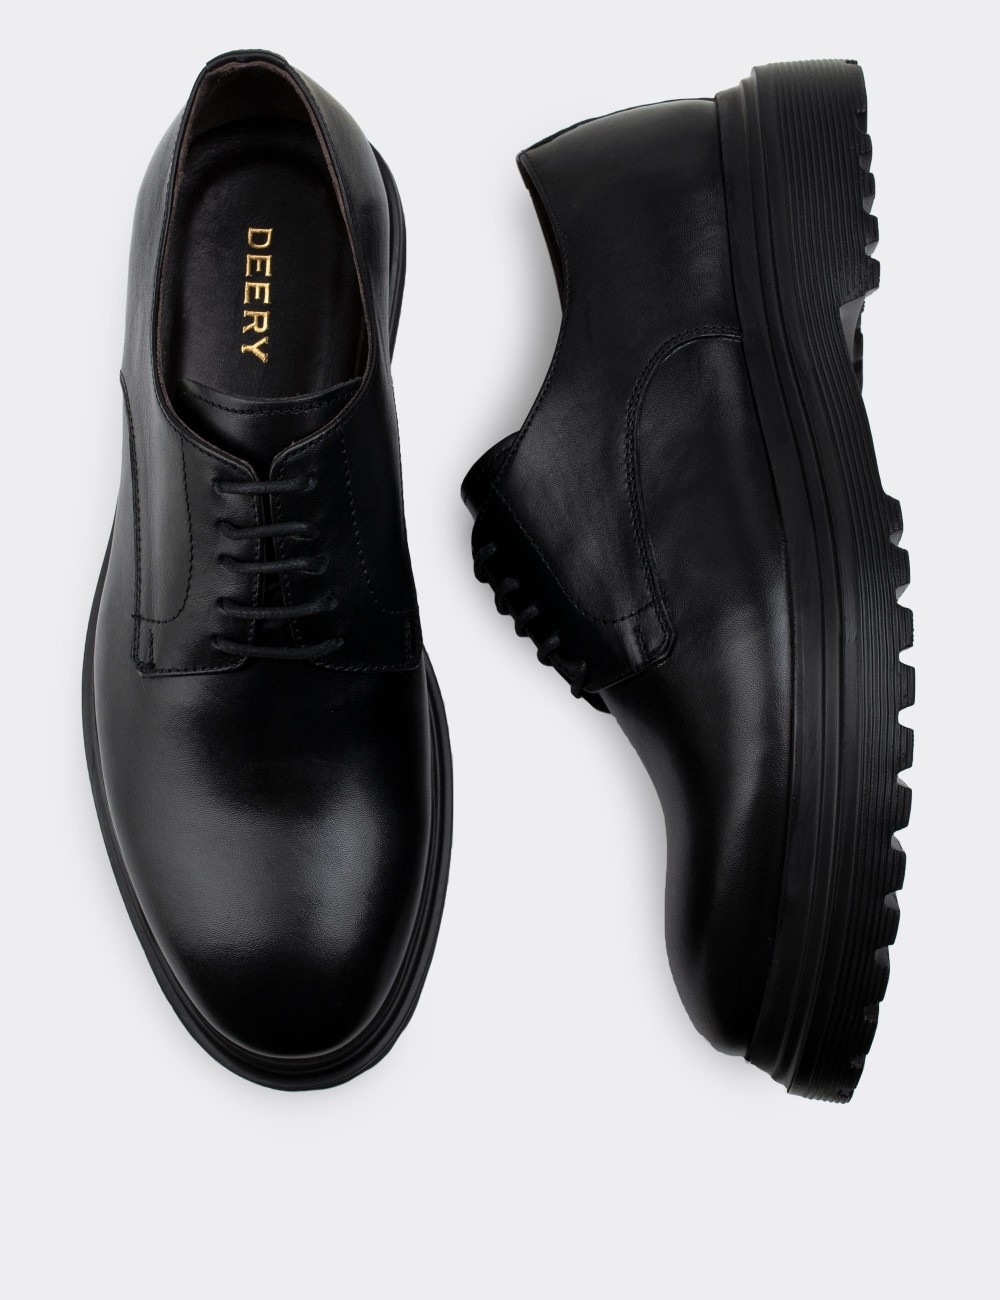 Black  Leather Lace-up Shoes - 01854MSYHE01